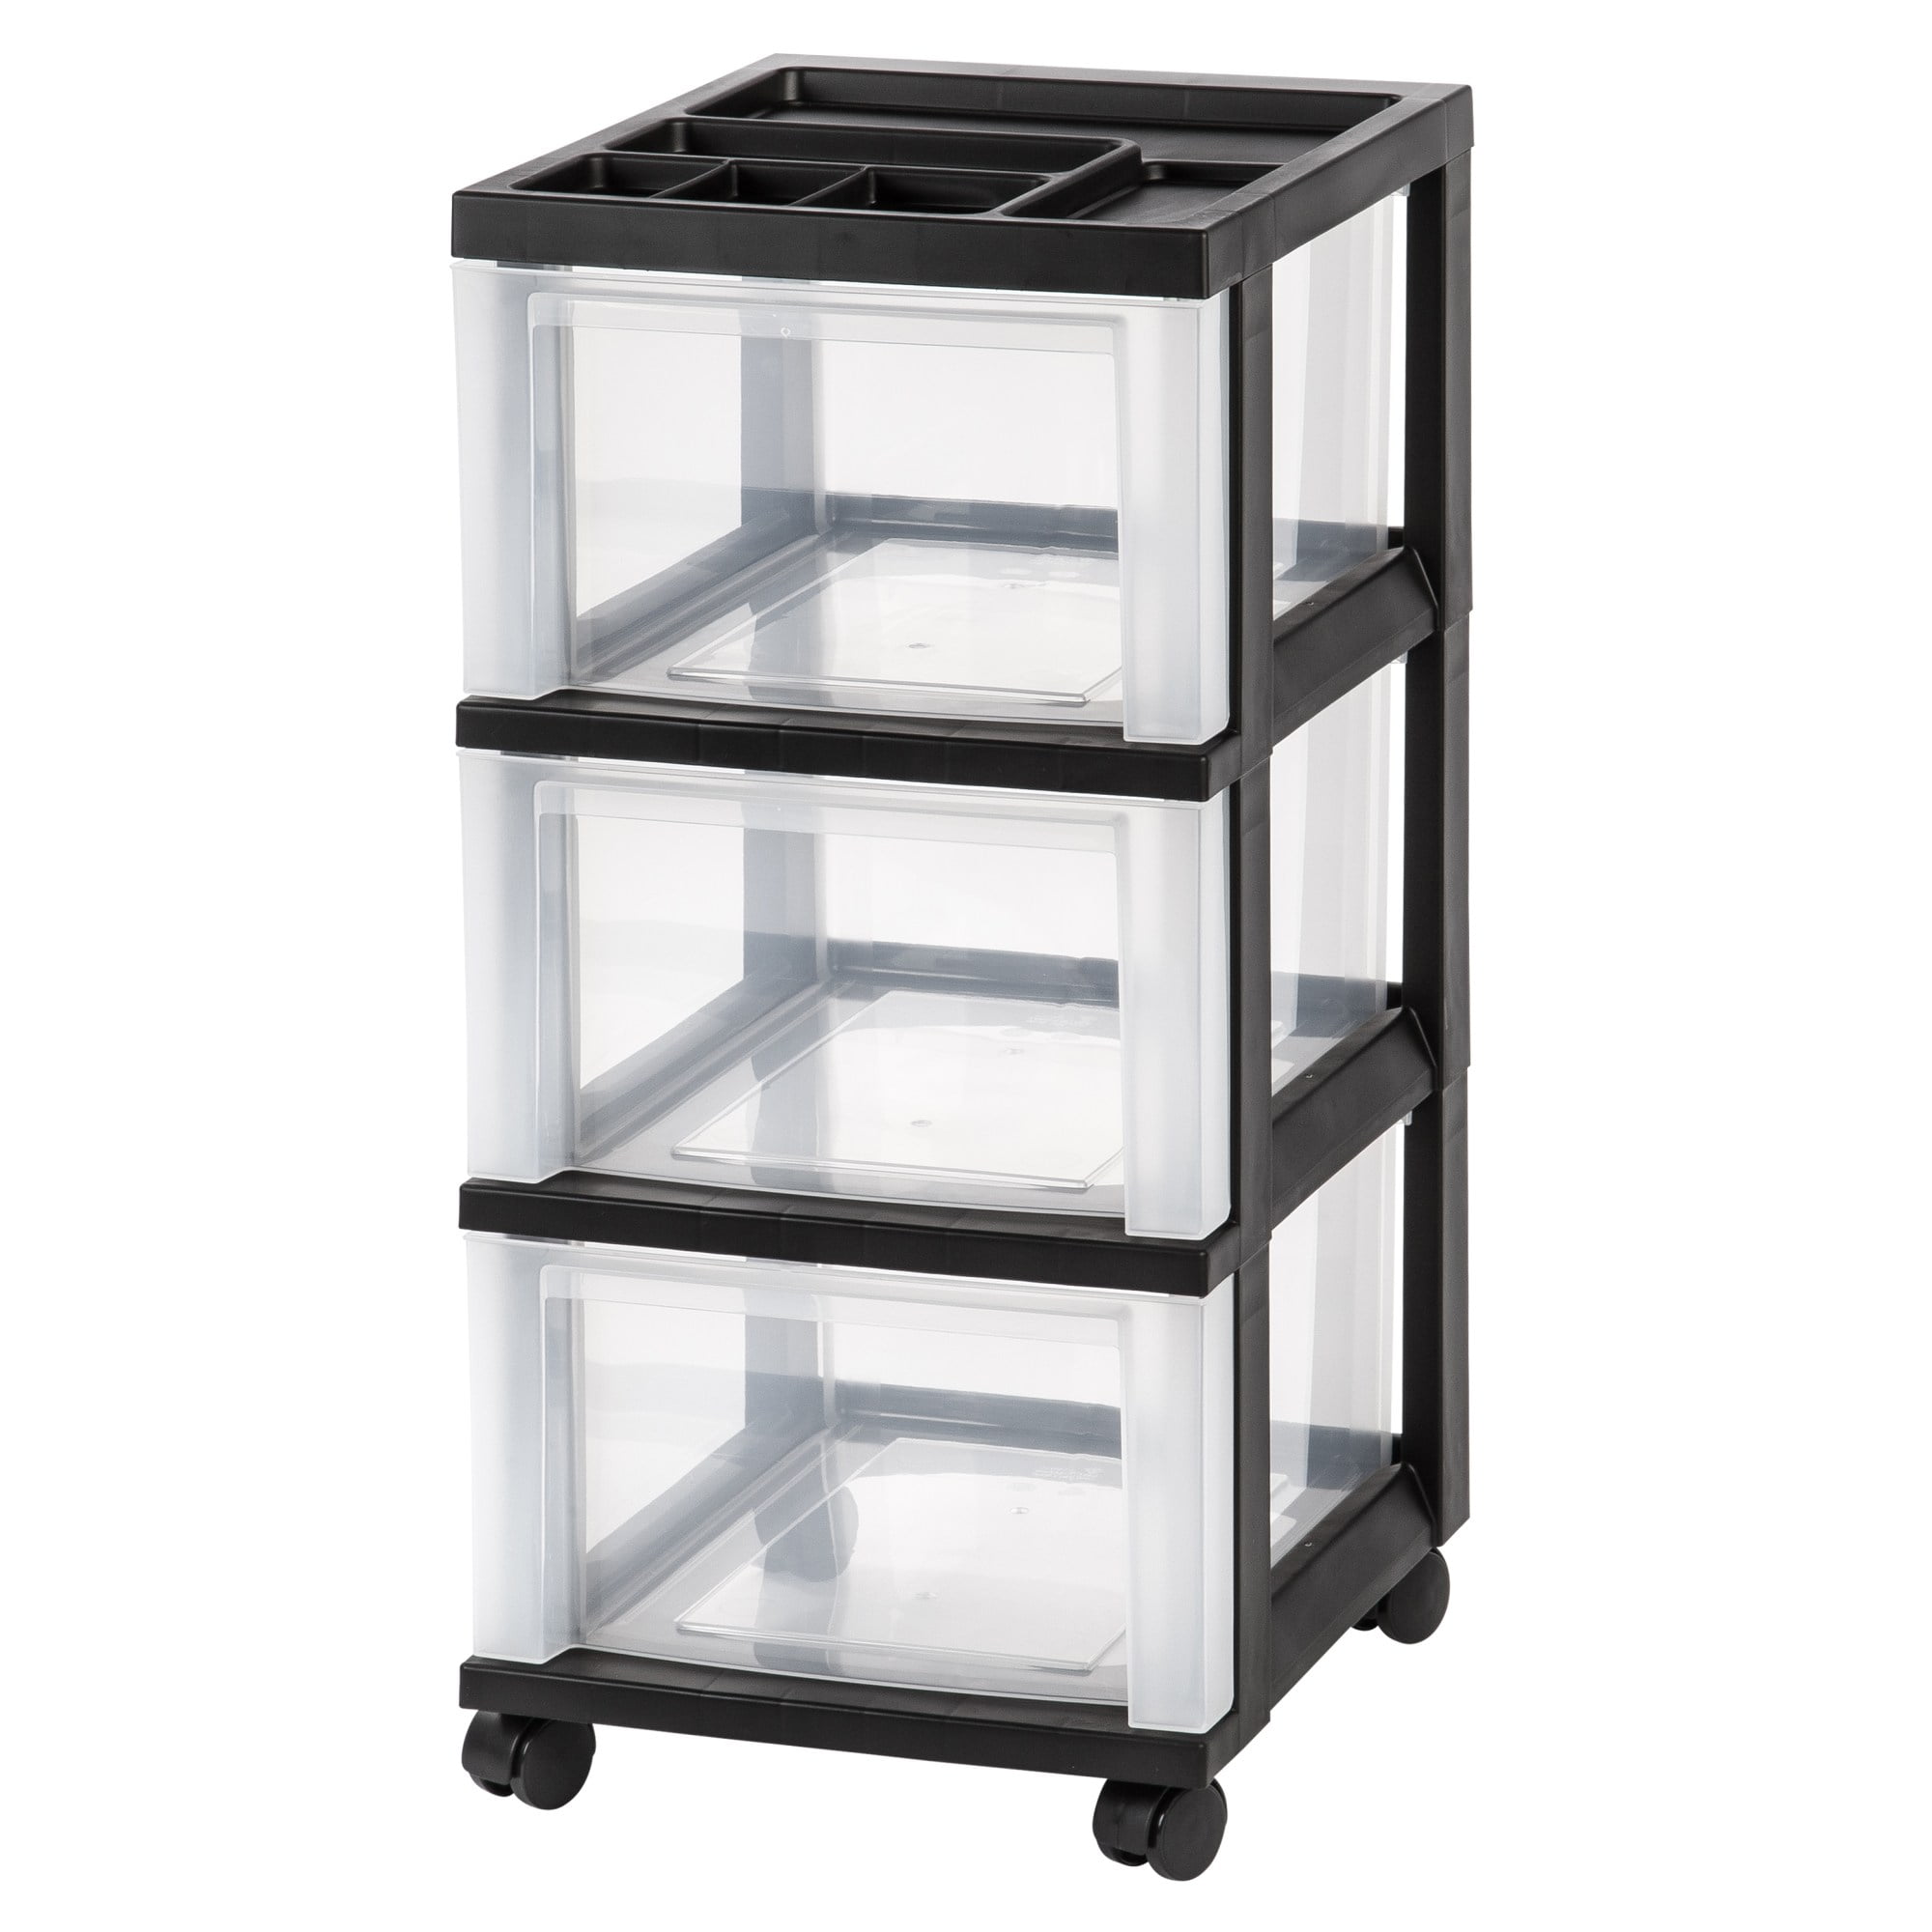 Details about   Utility Cart Trolley Organizer Storage 3Tier Tool Service Rolling Salon SpaY301D 